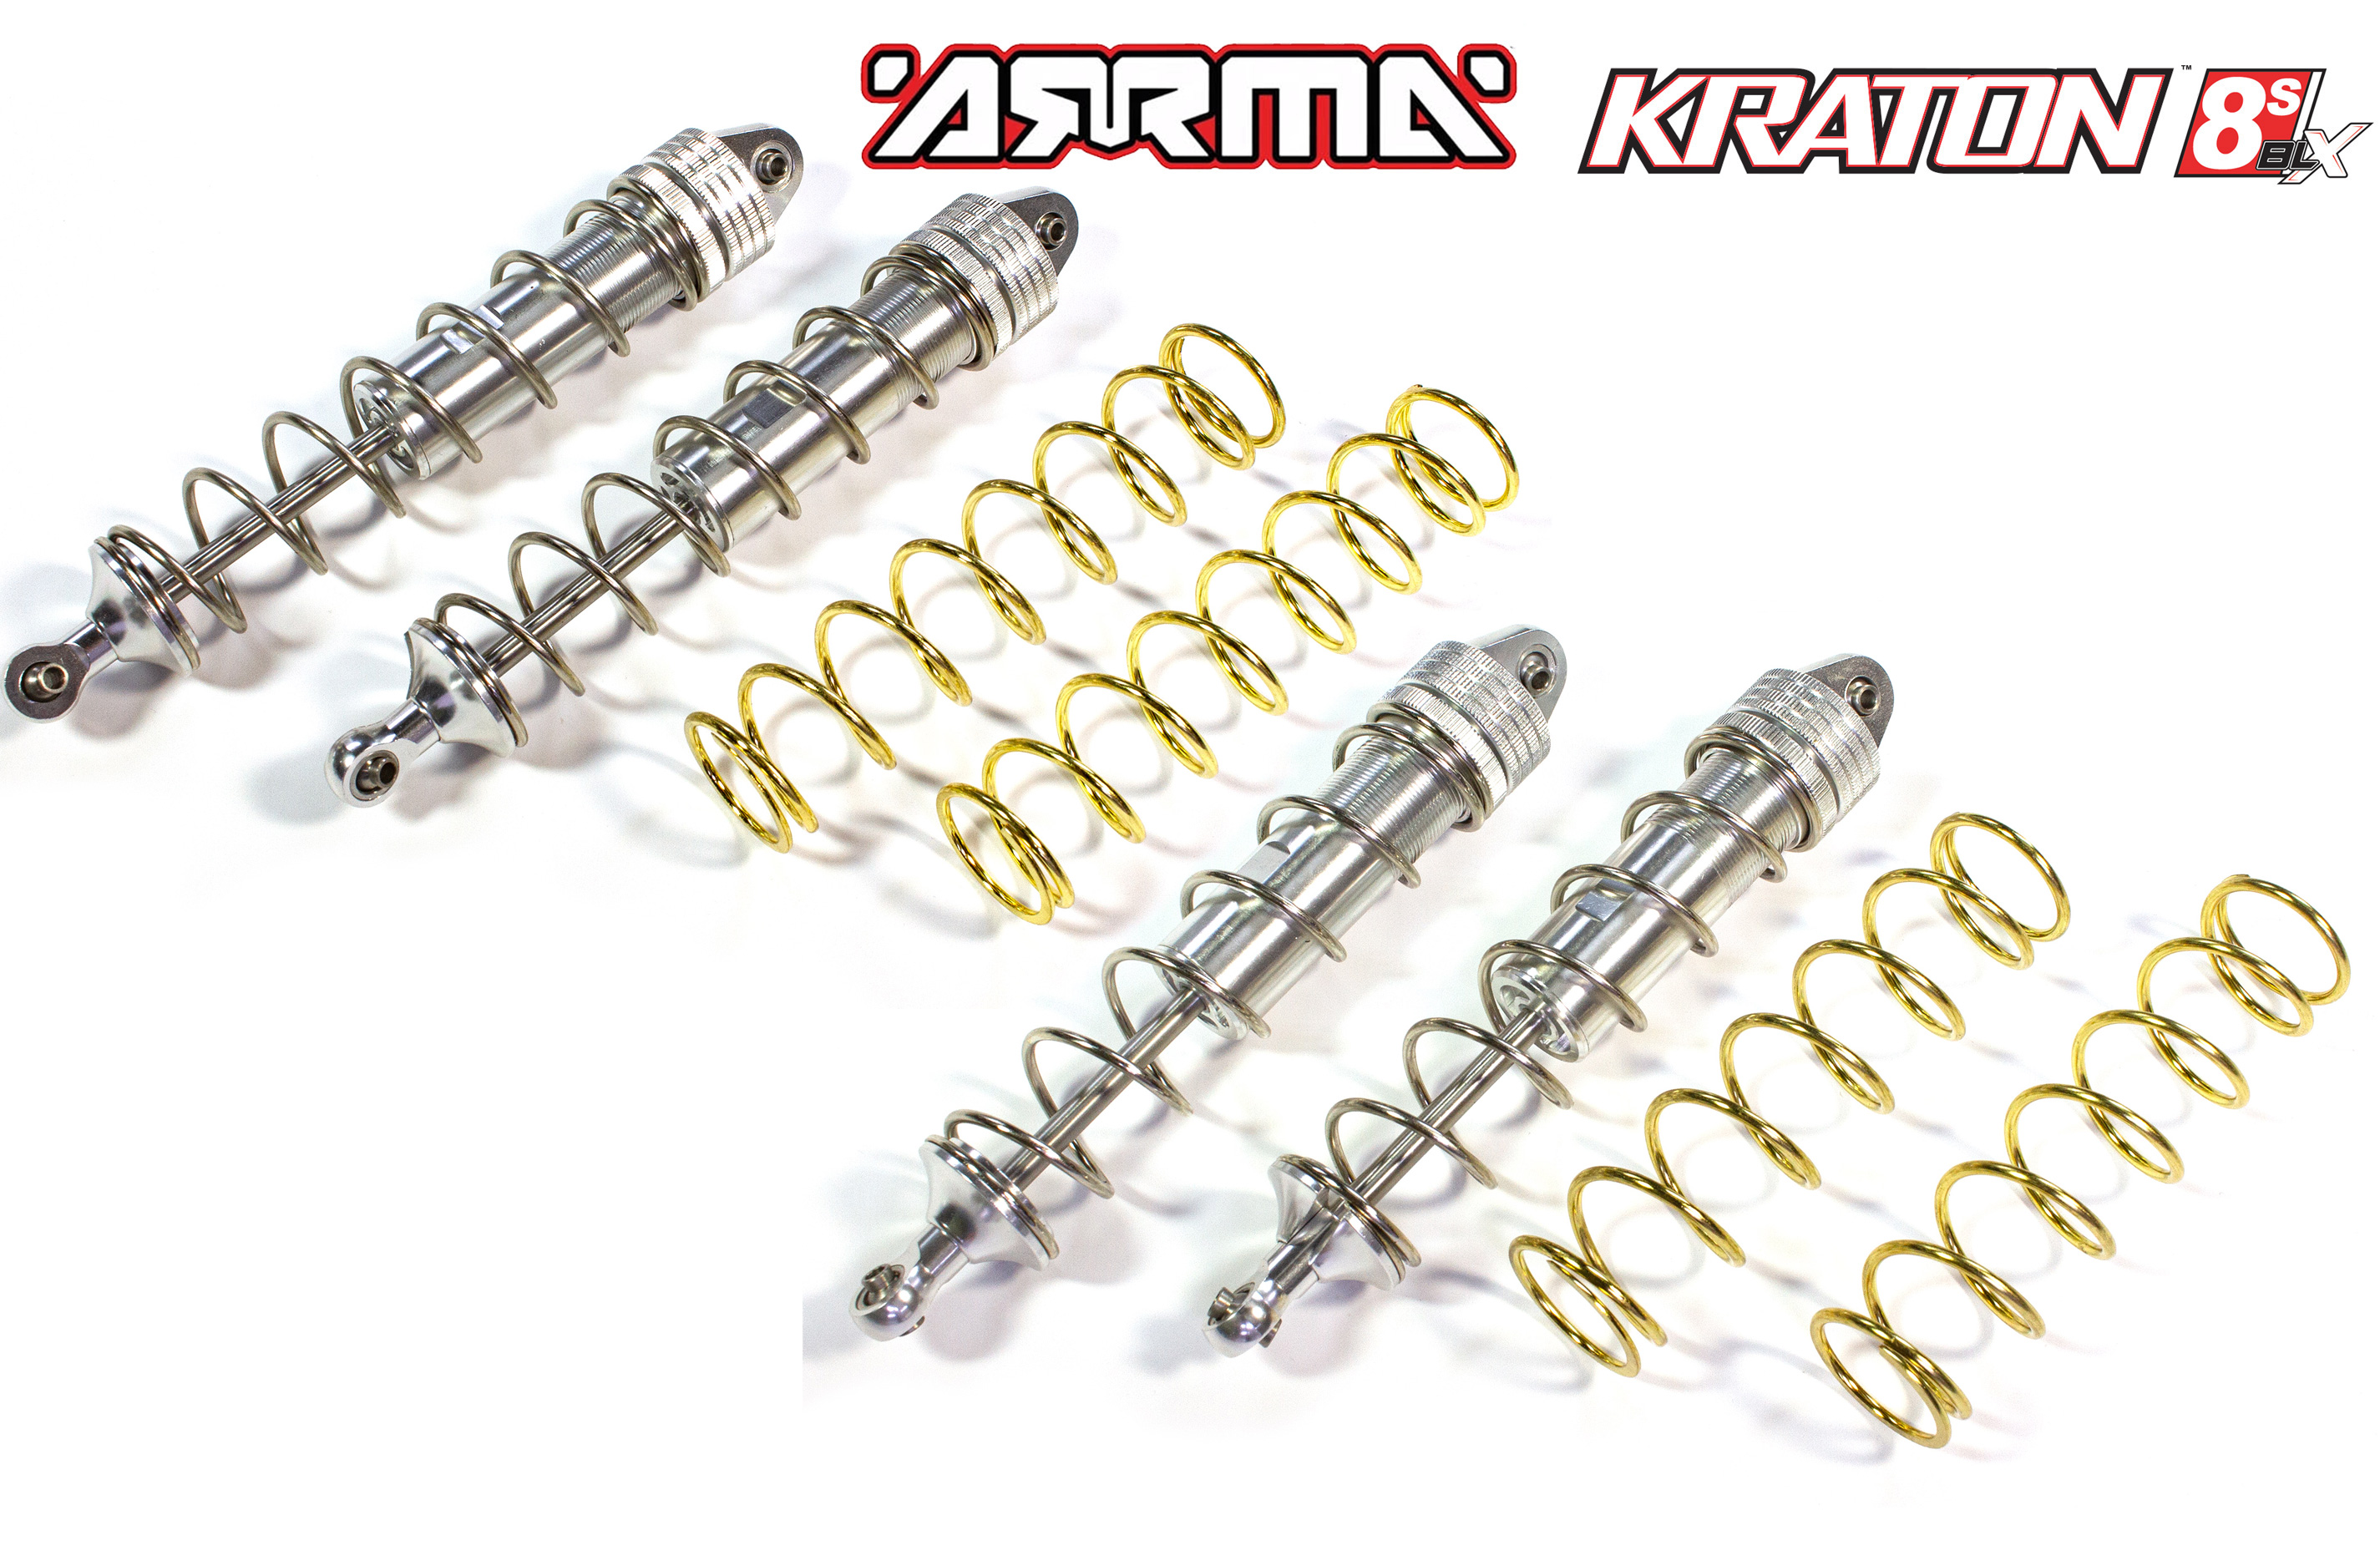 MAKX177F+R GPM shocks for Arrma Kraton 8S, front and rear, 2 pairs